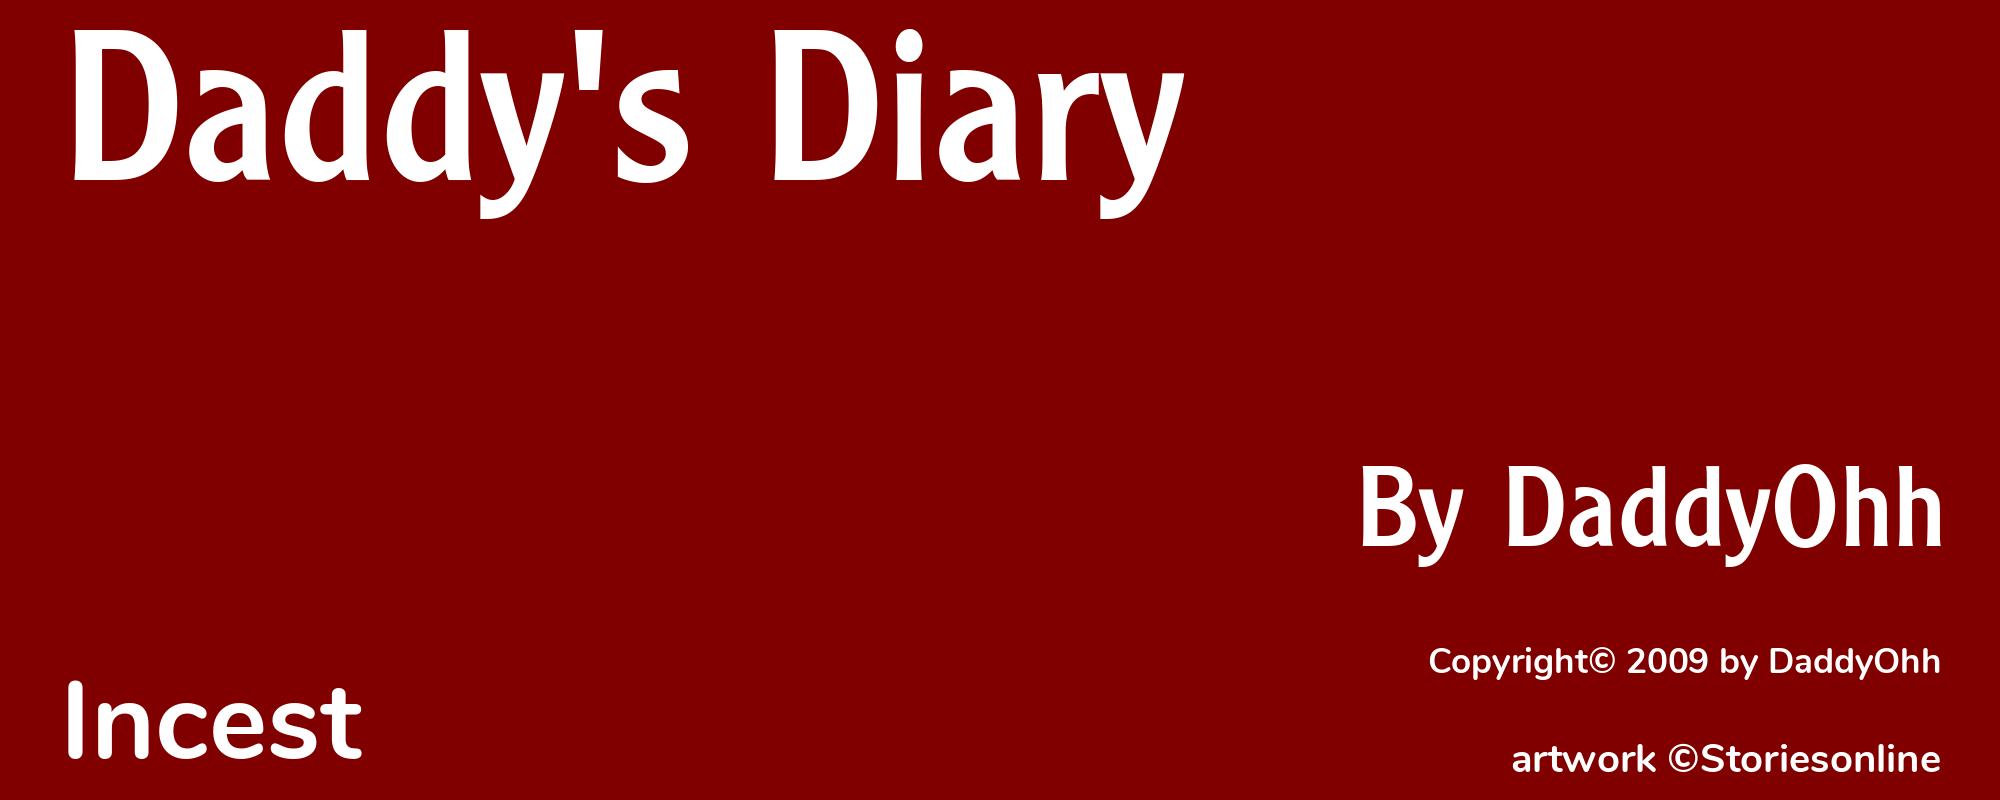 Daddy's Diary - Cover